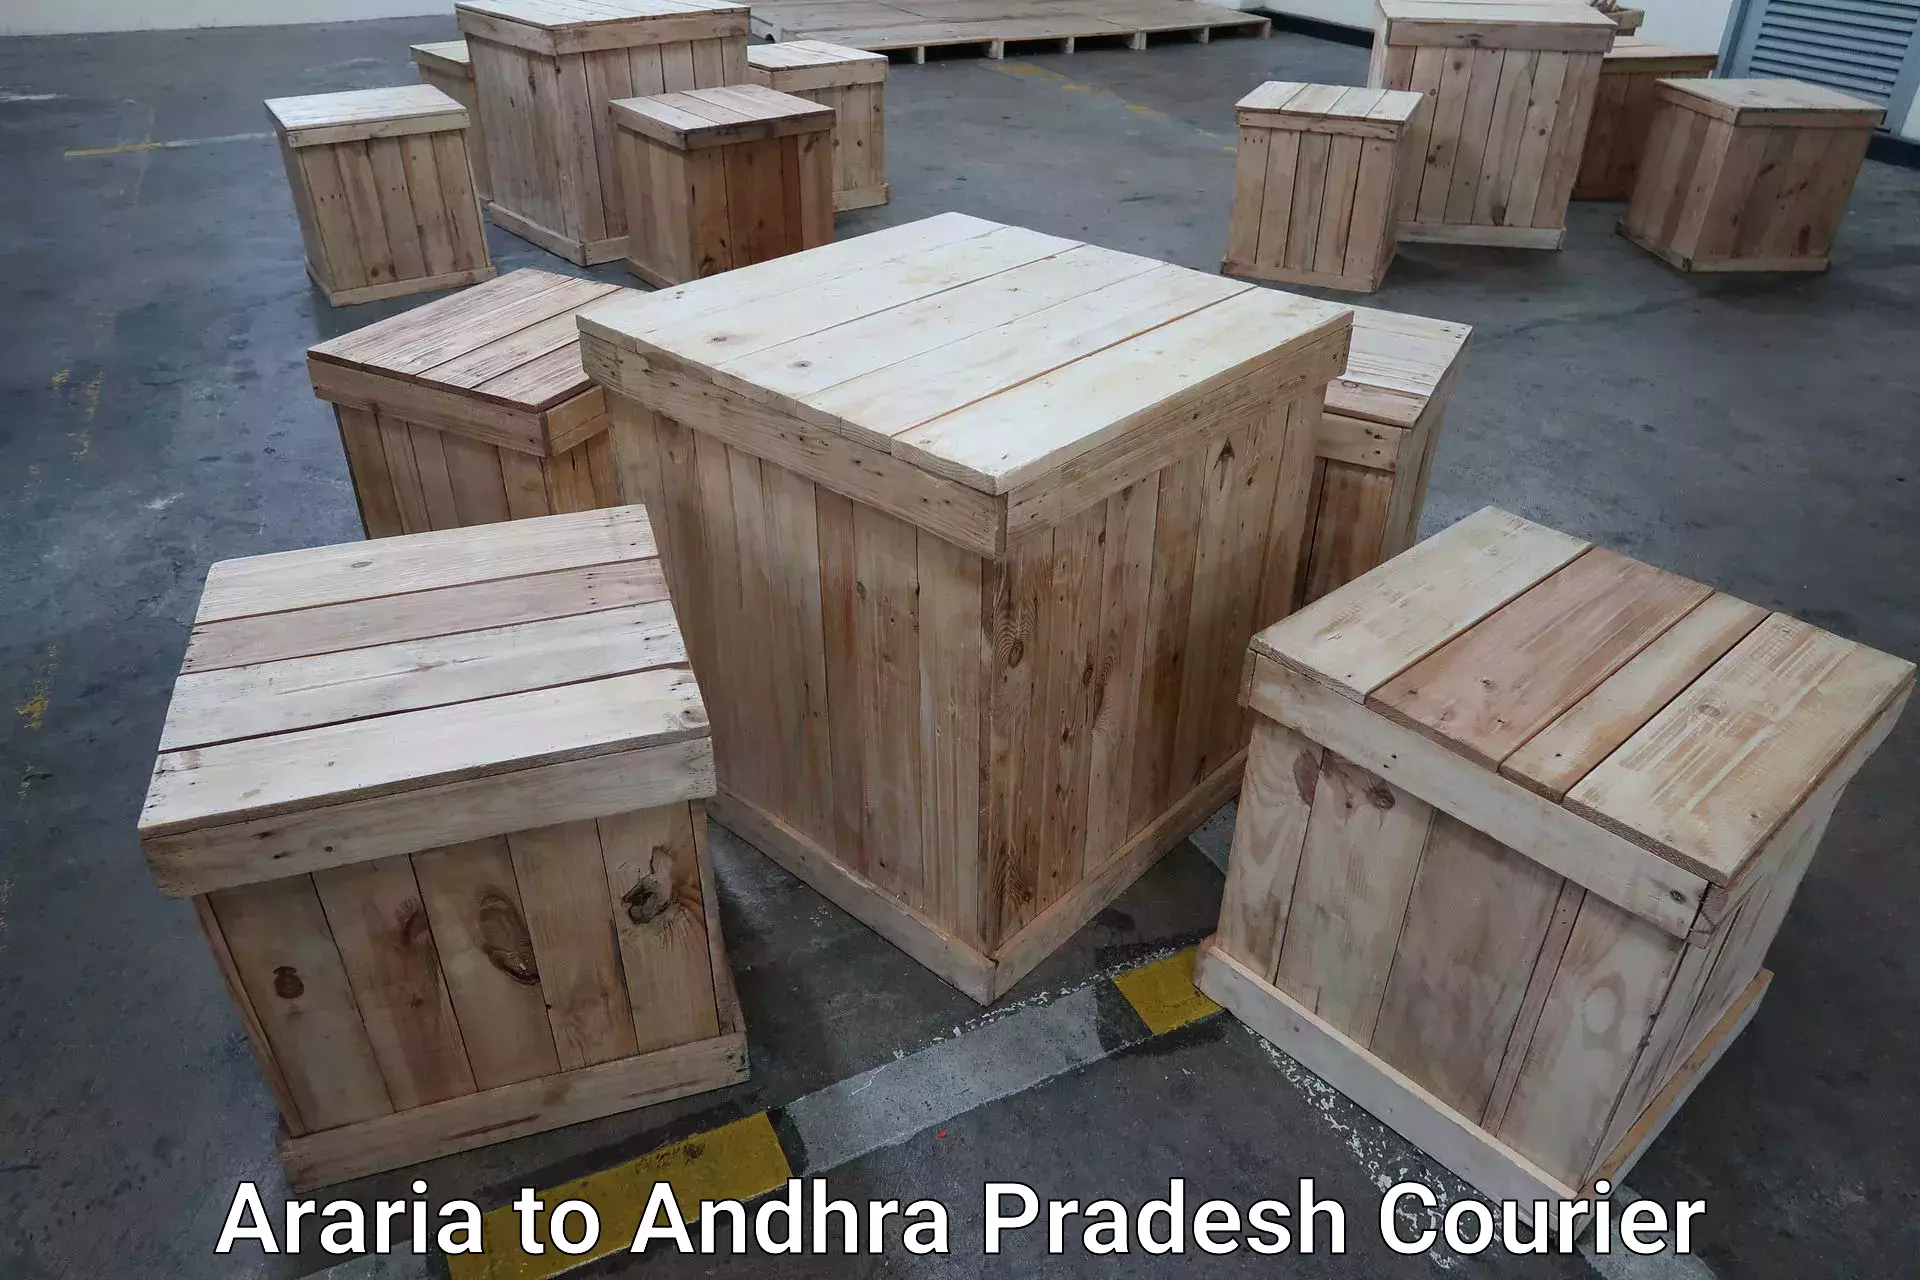 Luggage delivery network Araria to Andhra Pradesh